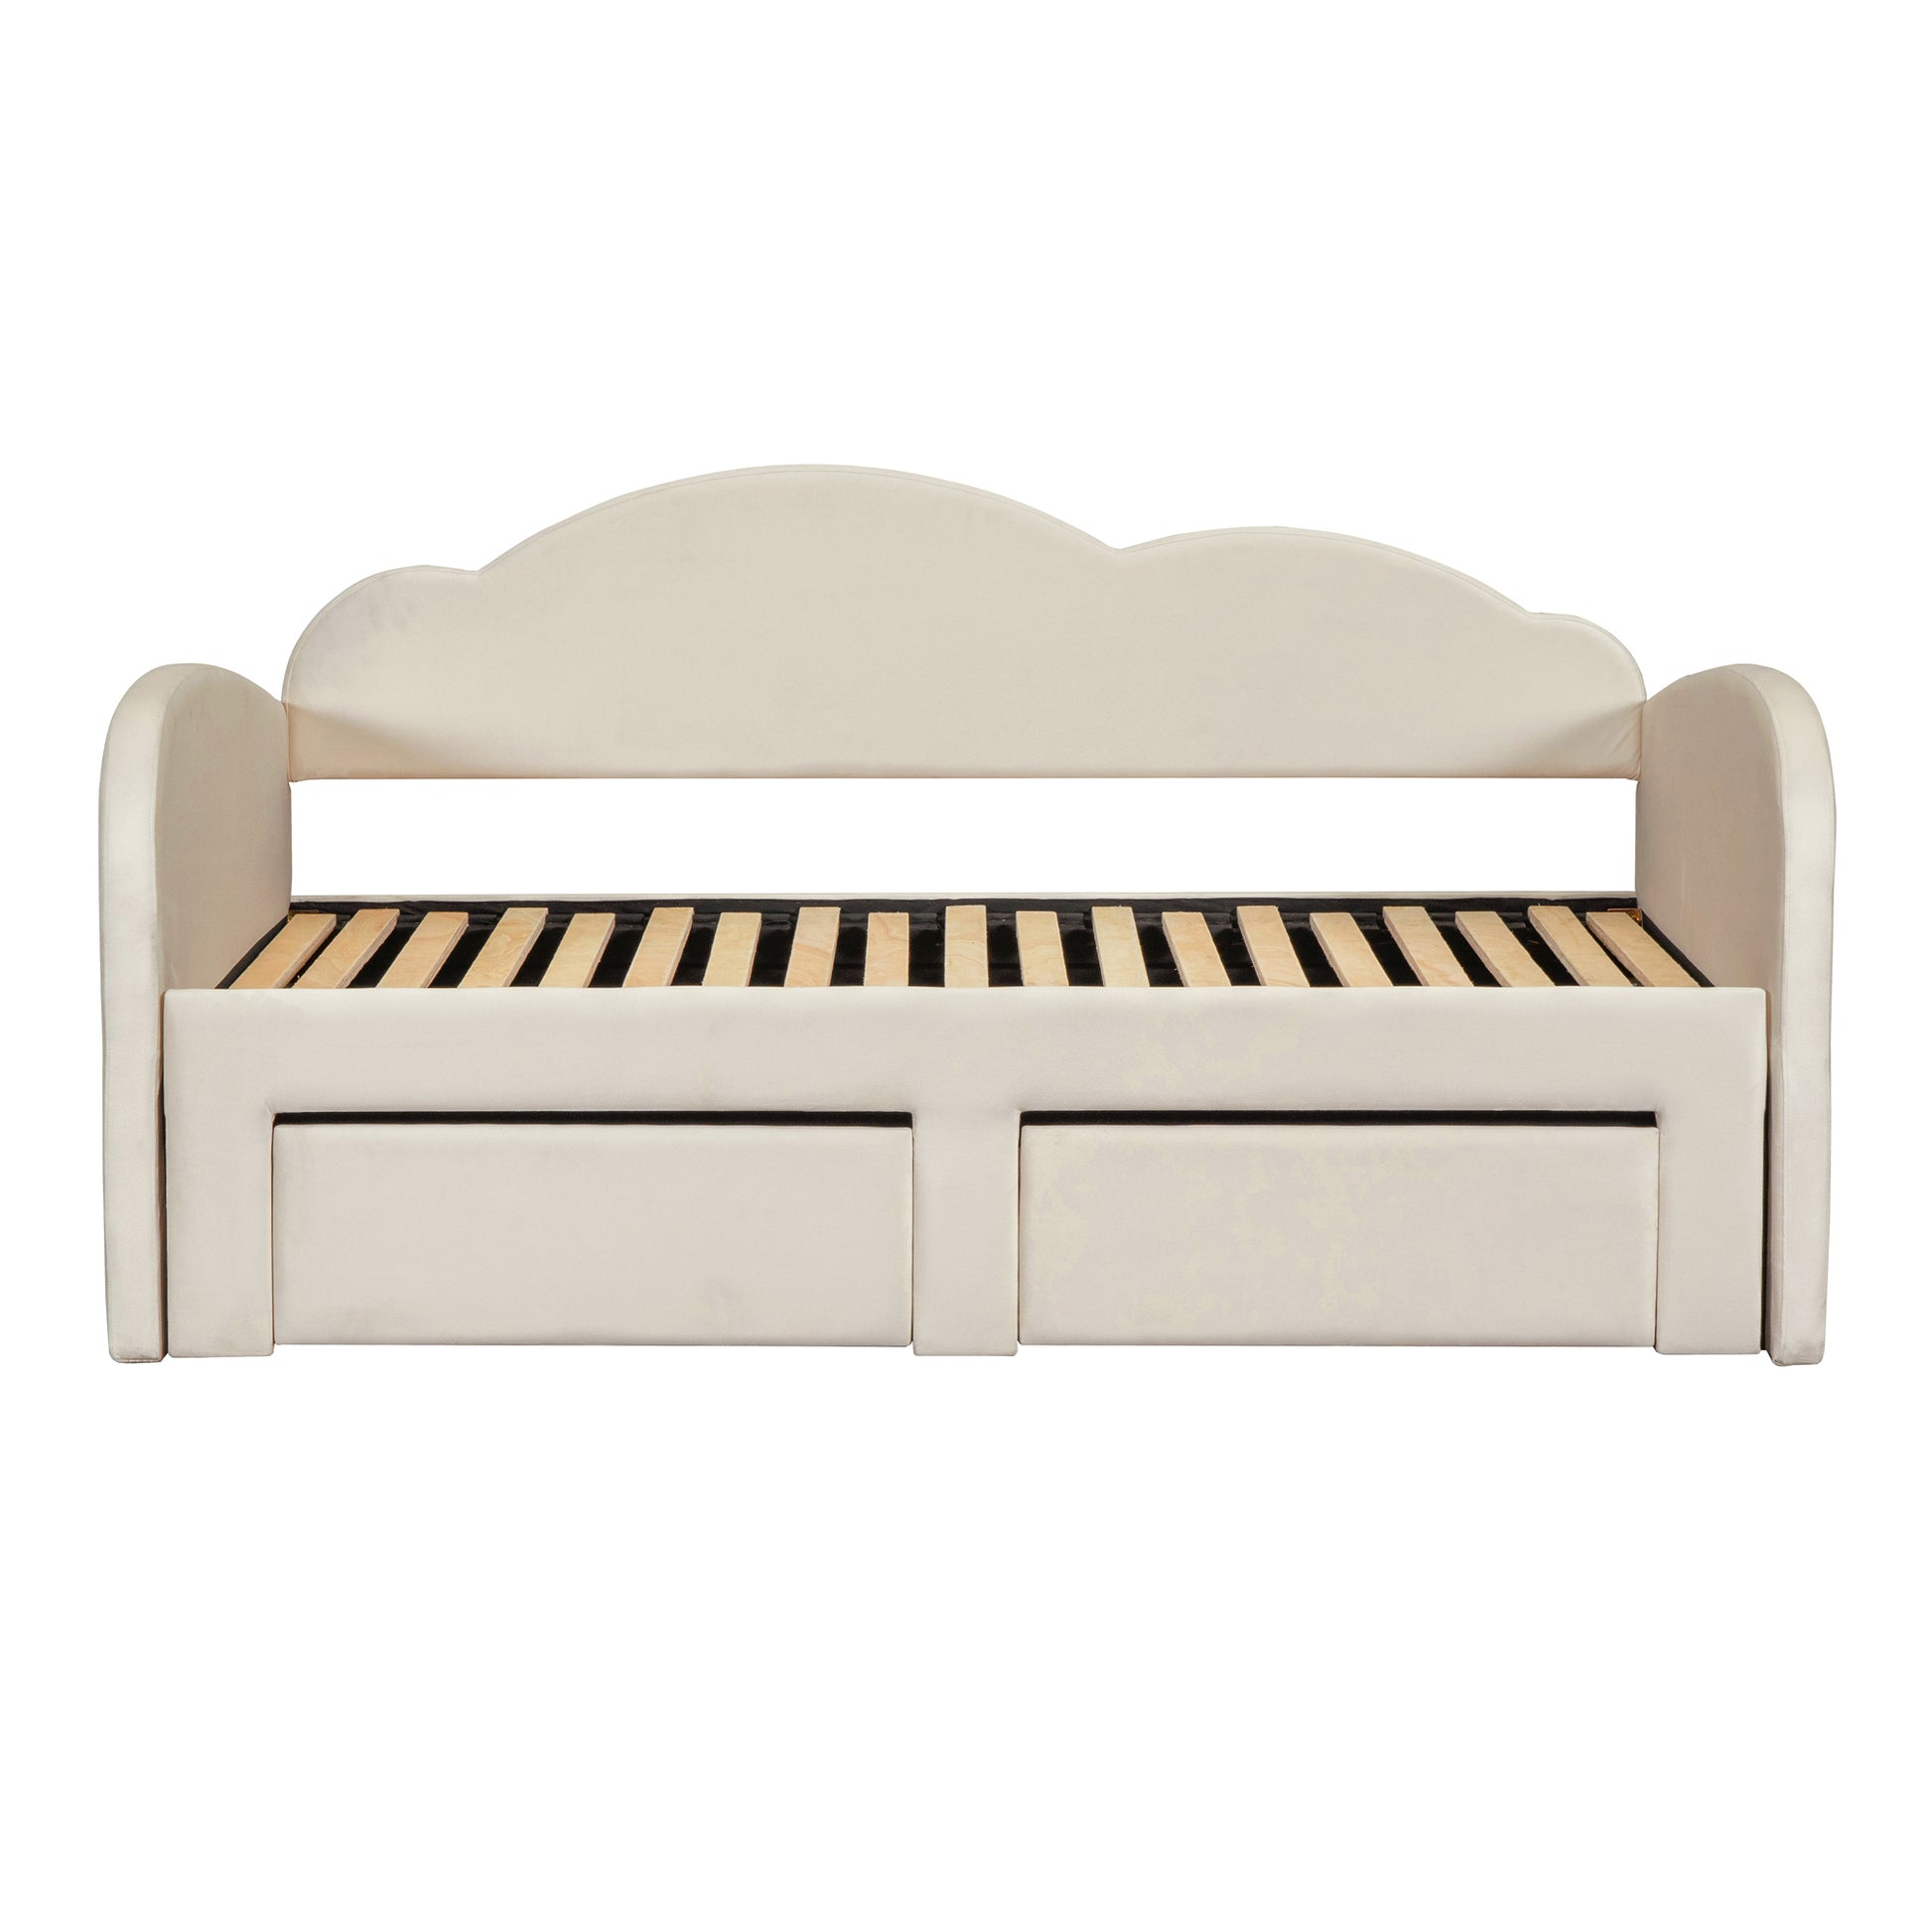 Twin Size Upholstered daybed with Cloud-Shaped Backrest, Trundle & 2 Drawers and USB Ports, Beige - Enova Luxe Home Store